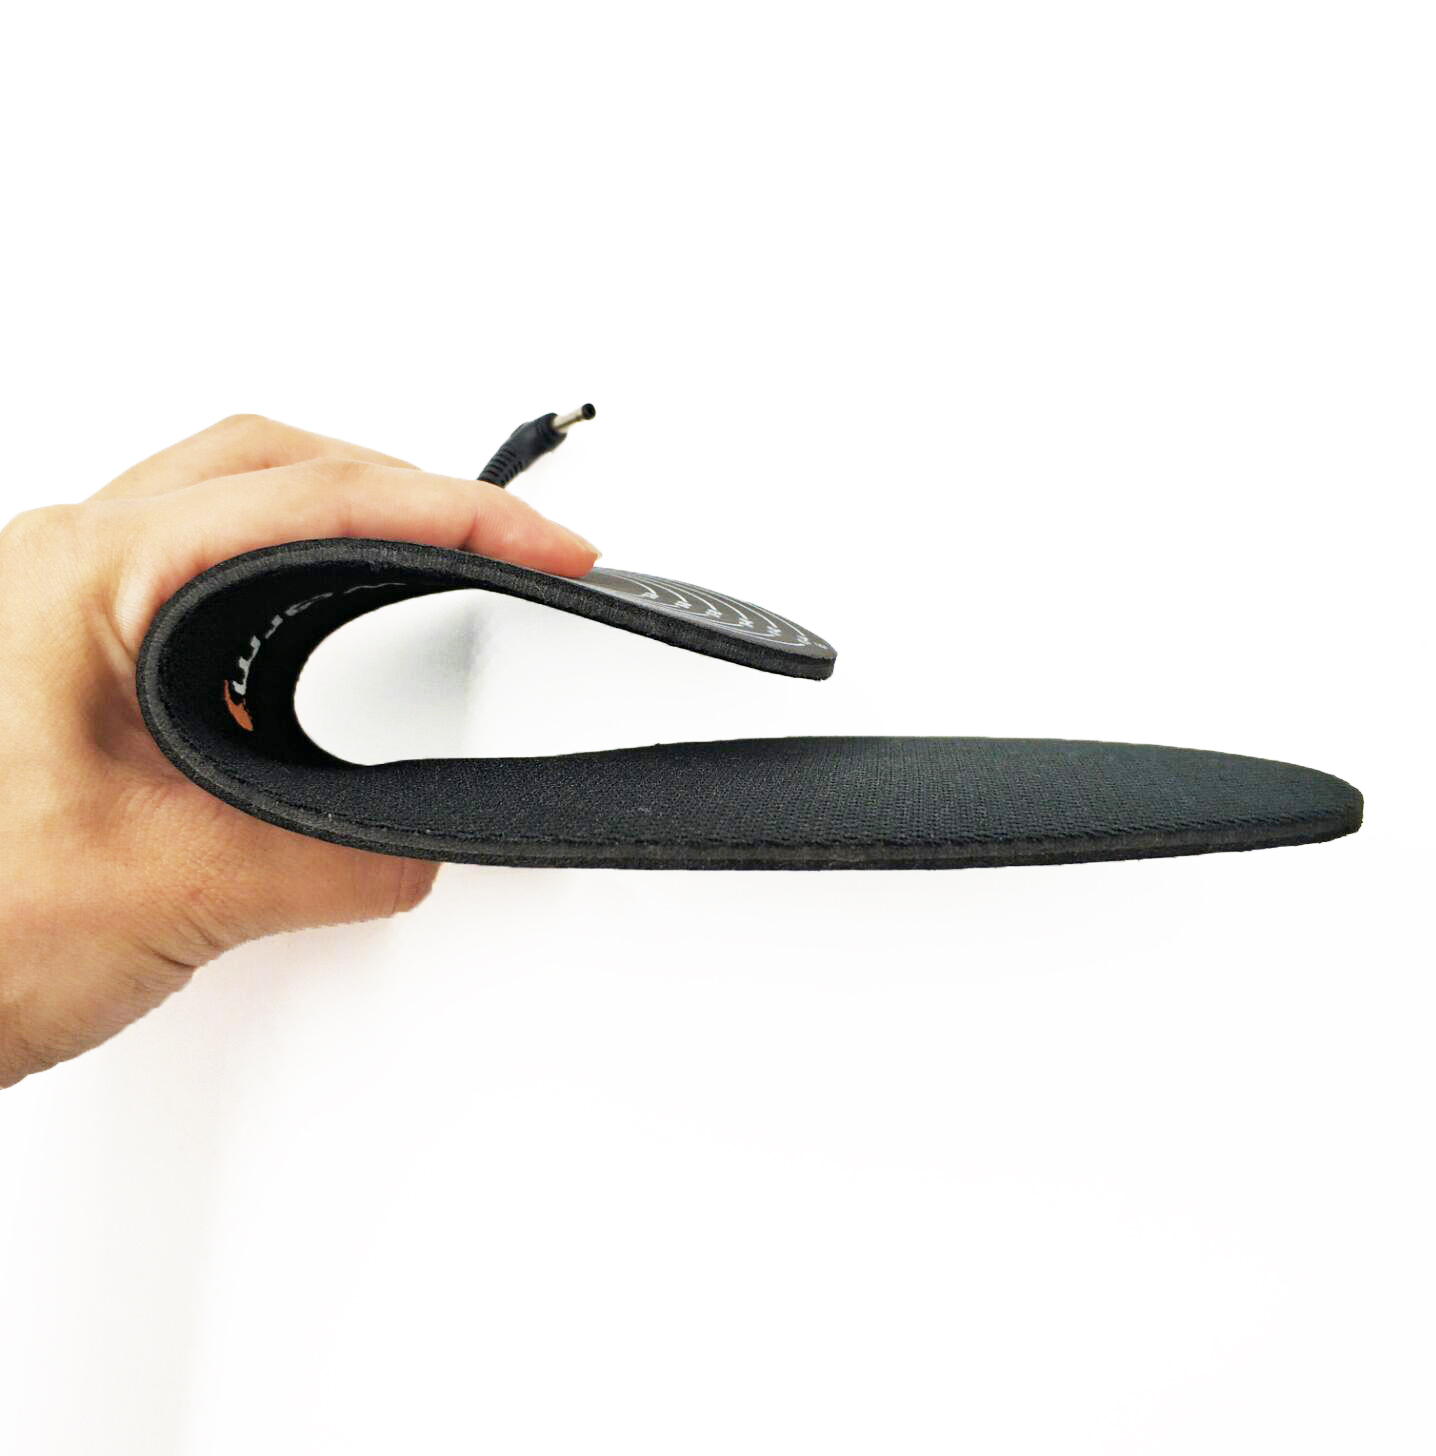 S-King-Professional Heated Insoles Best Heated Insoles Manufacture